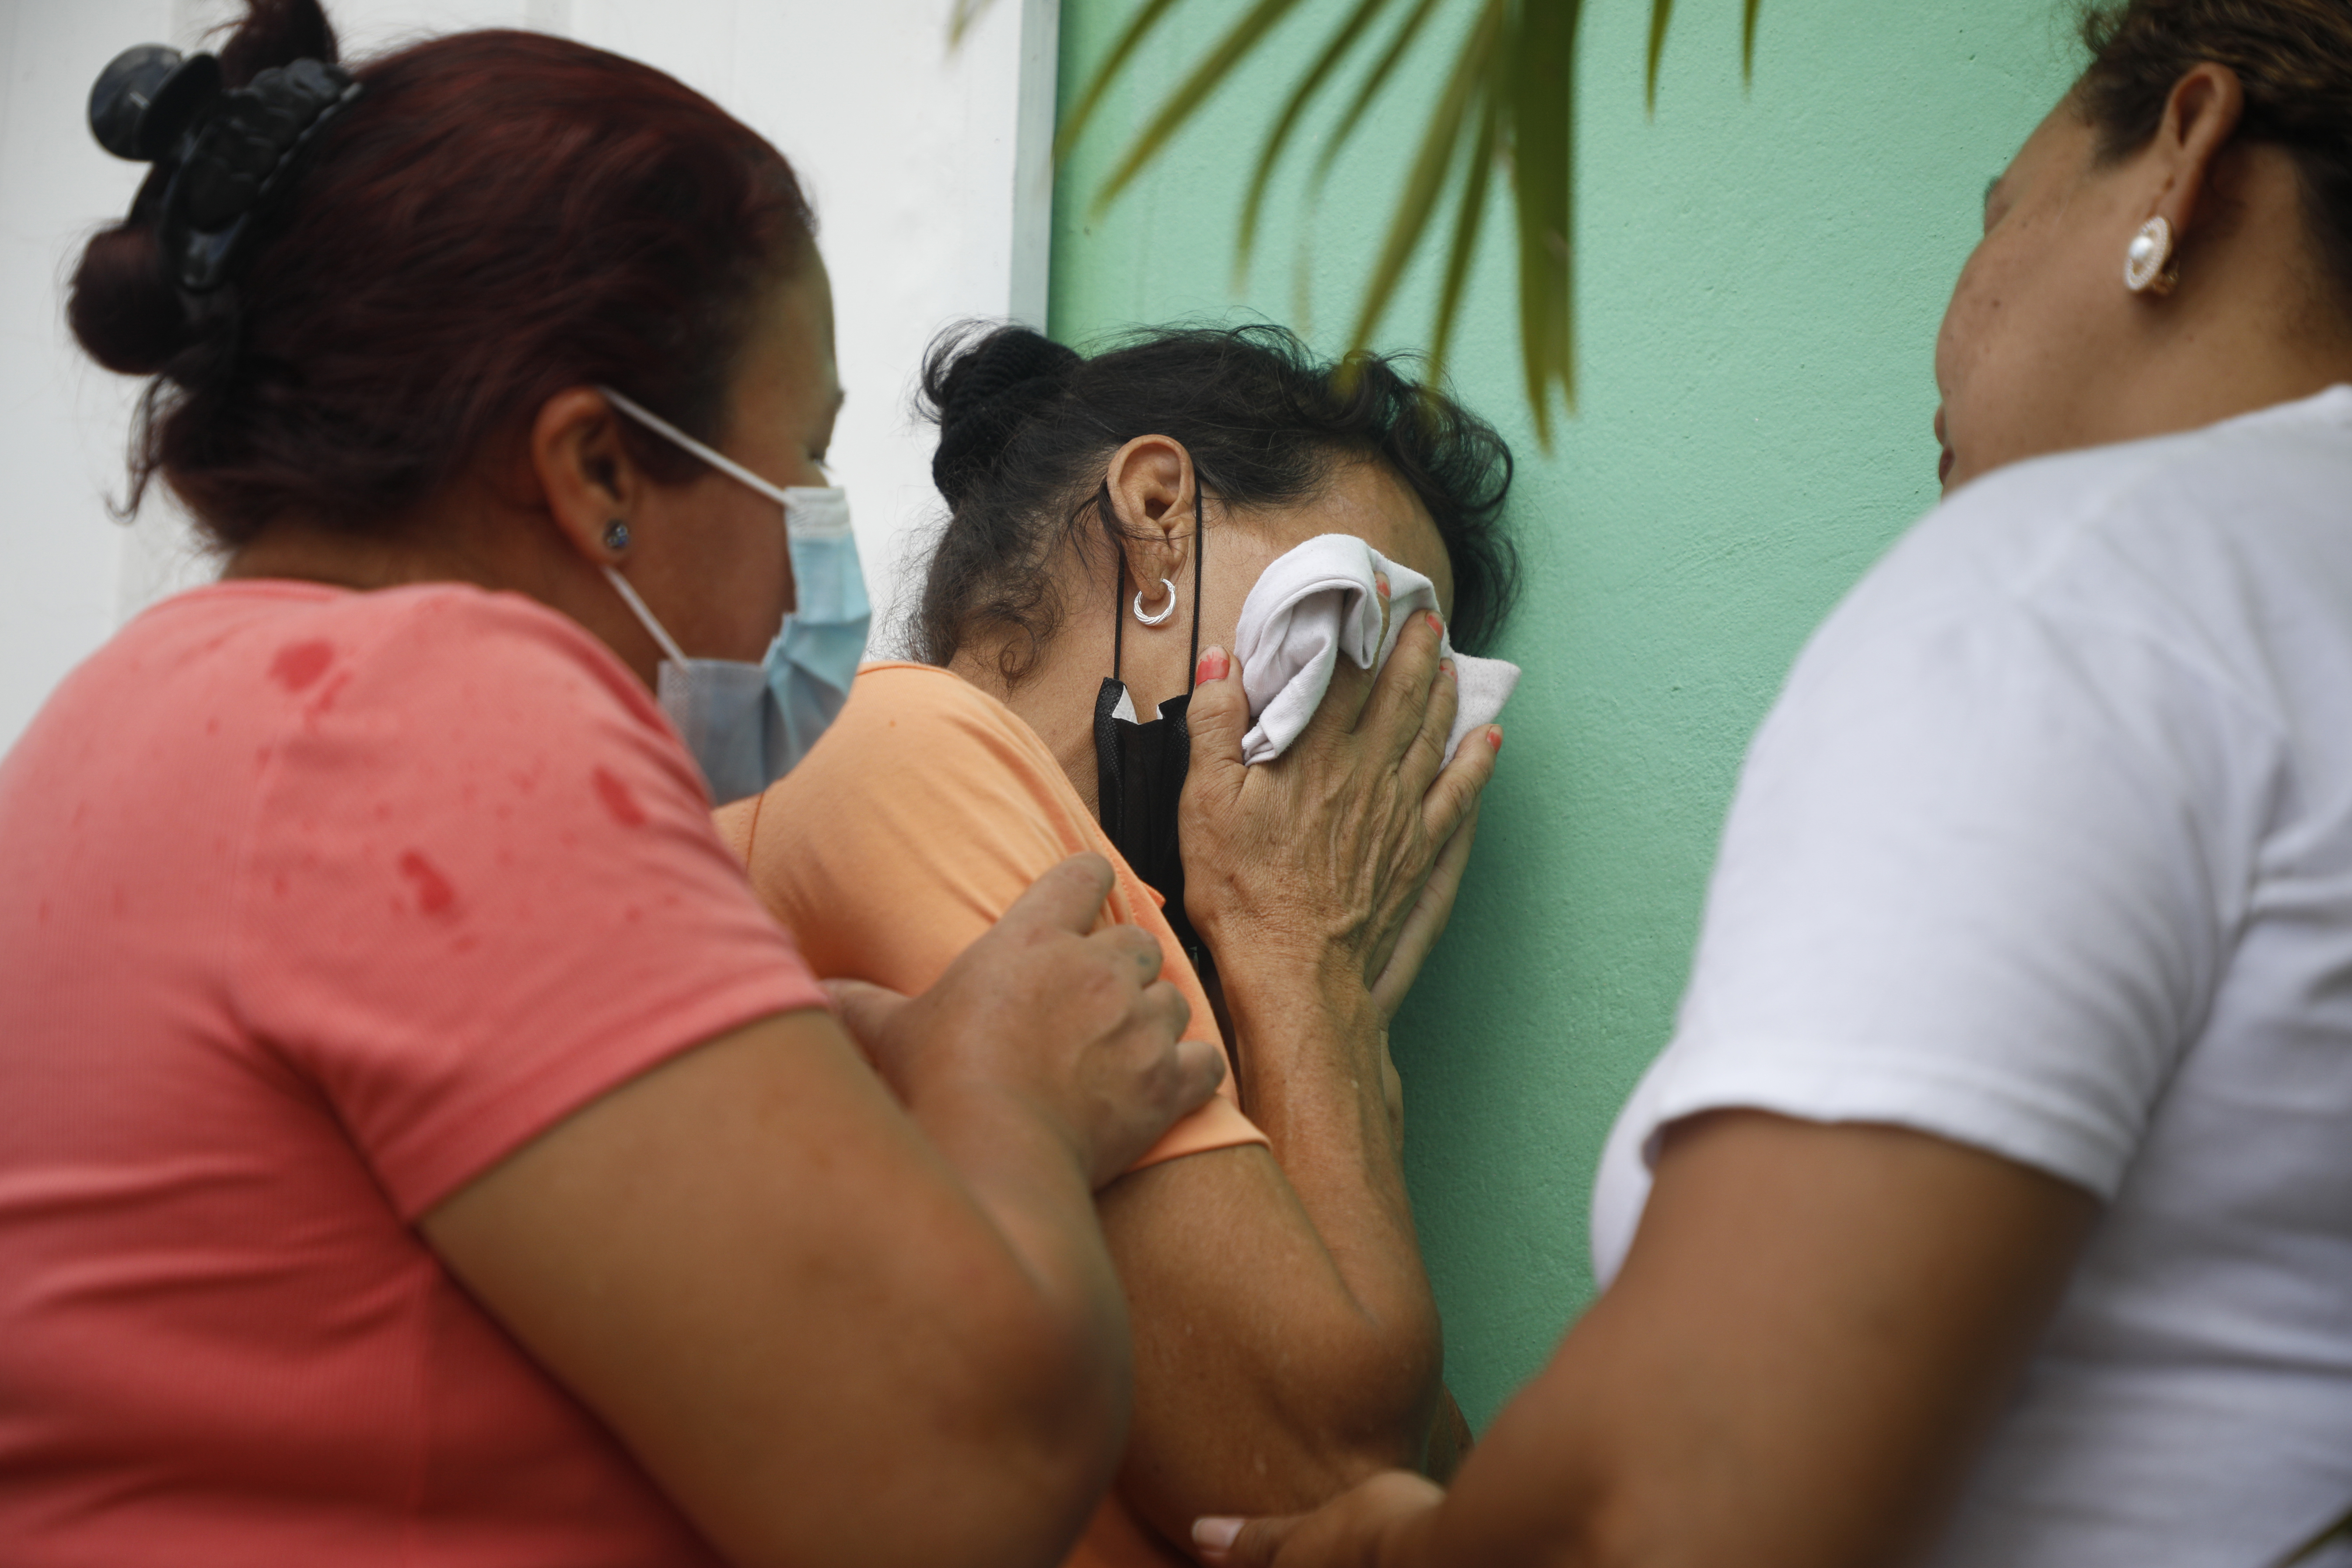 Relatives of inmates wait in distress outside the entrance to the women's prison in Tamara, on the outskirts of Tegucigalpa, Honduras, Tuesday, June 20, 2023.